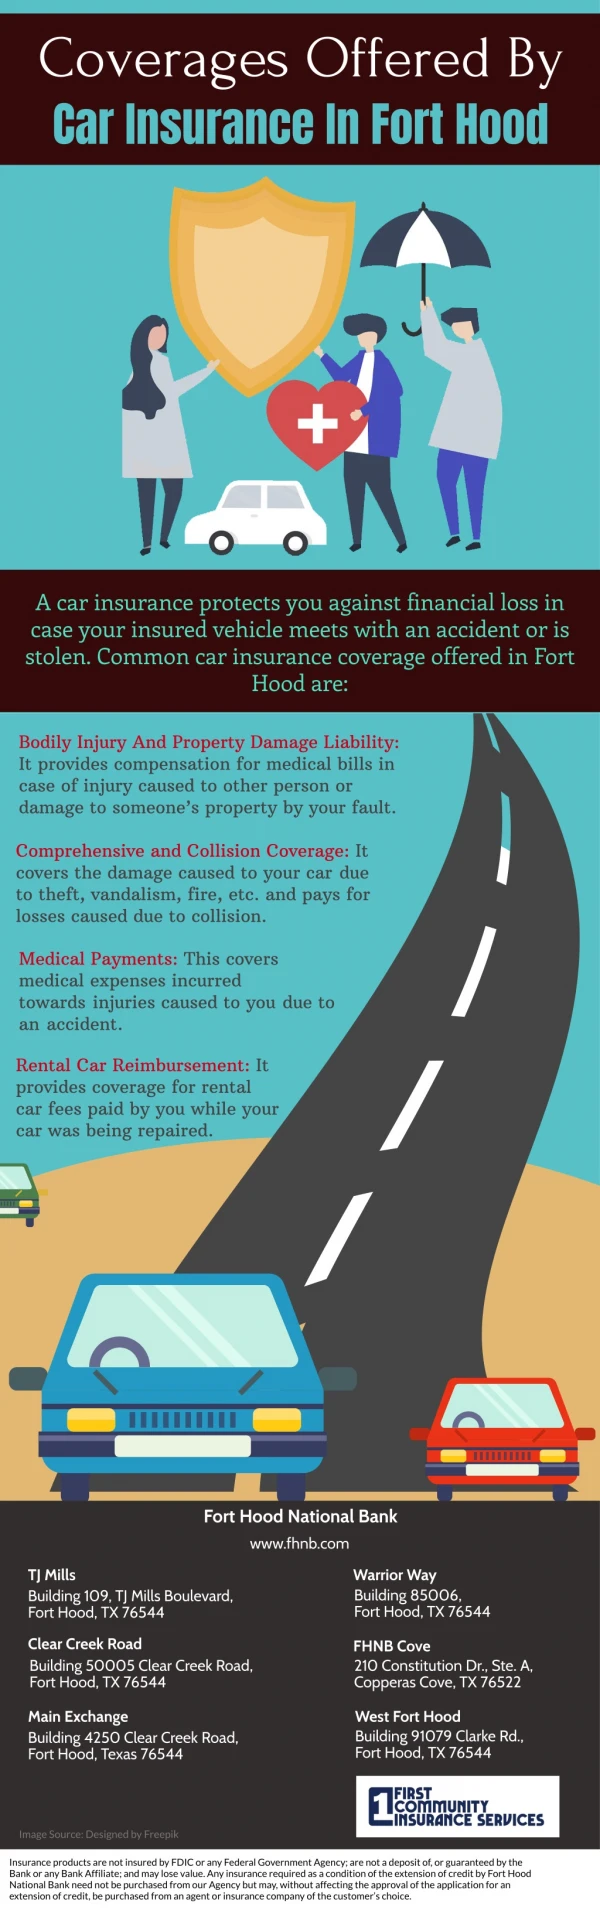 Coverages Offered By Car Insurance In Fort Hood